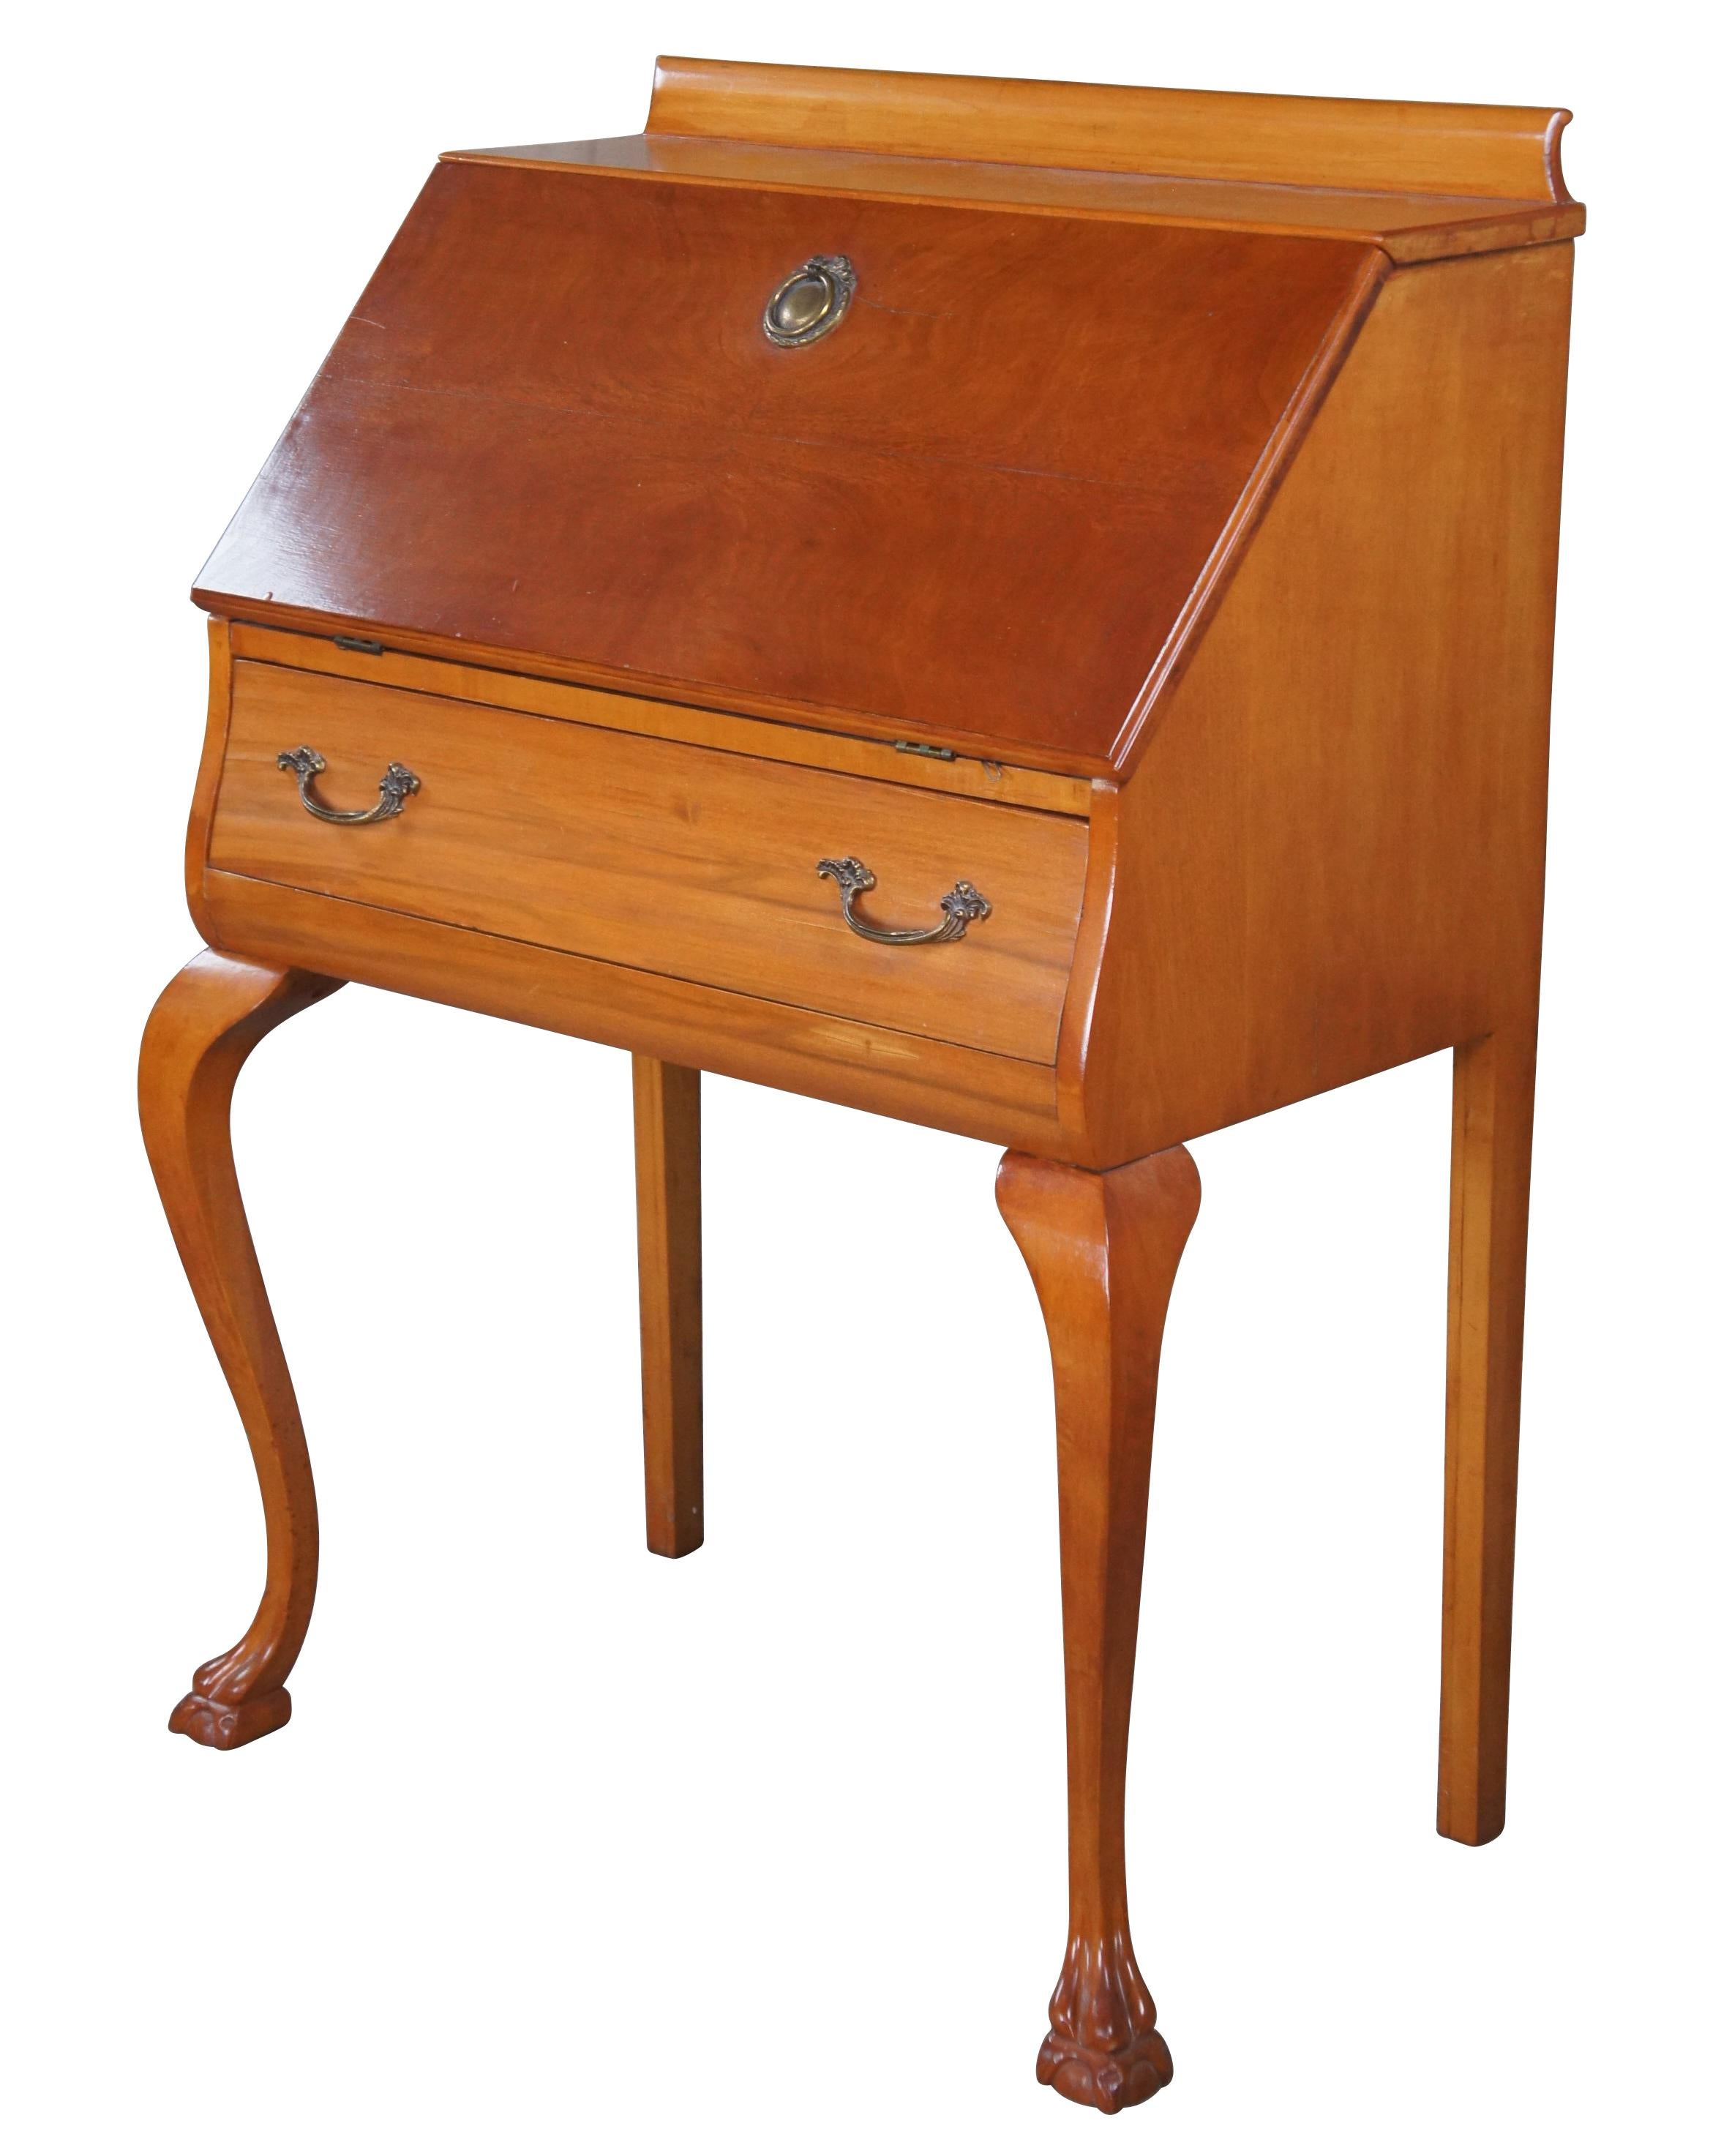 An antique early 20th century ladies' secretary desk. Made from walnut with a maple writing surface. Features a drop front with neoclassical brass hardware over large central drawer with French pulls. Opens to seven pigeonholes and an accessory